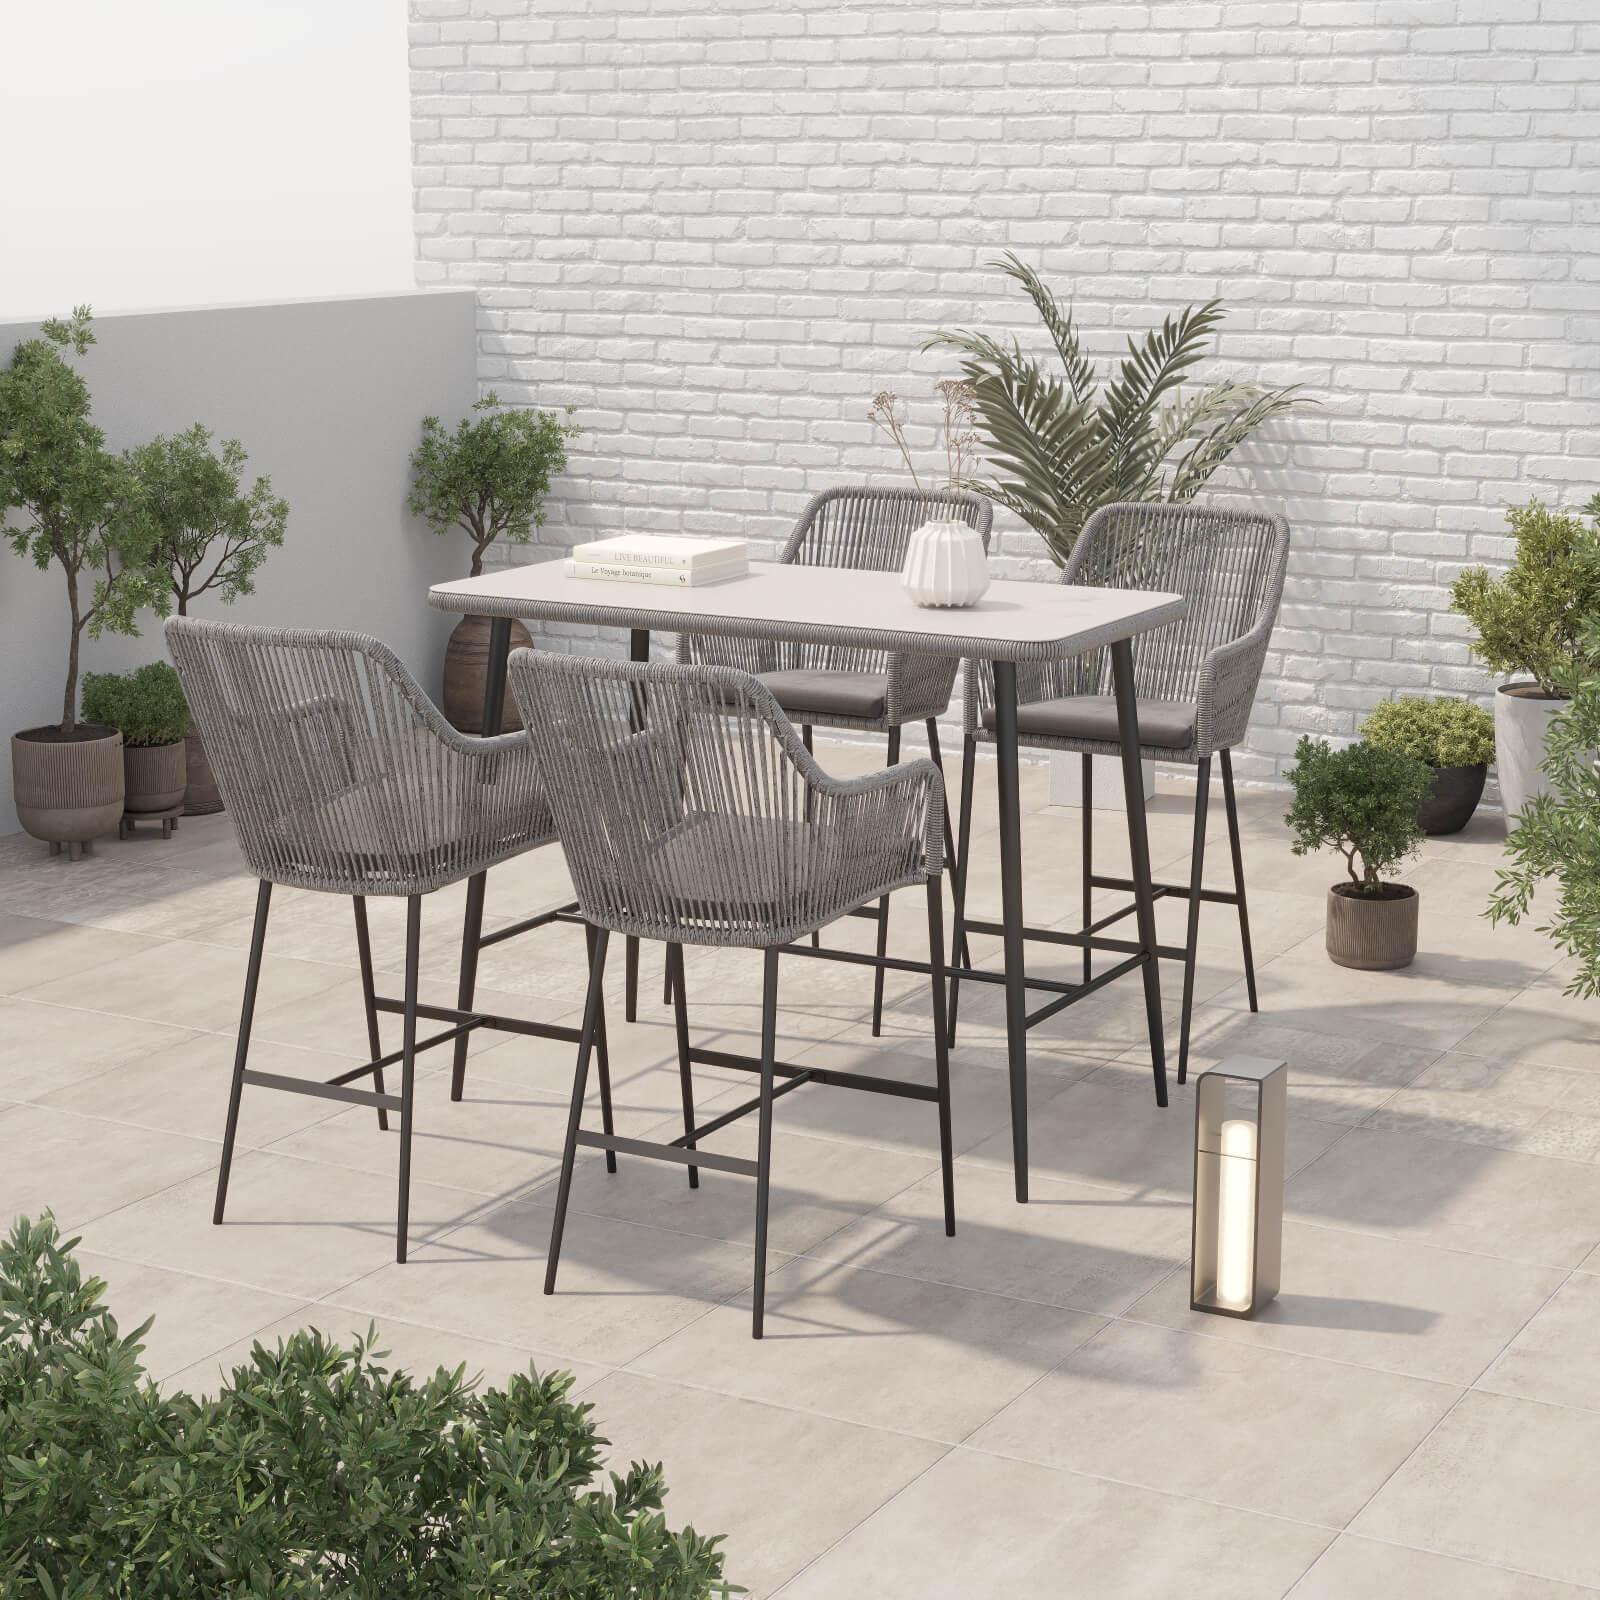 Hallerbos Modern Wicker Outdoor Furniture, steel frame outdoor bar height set with grey twisted rattan design, 1 bar table, 4 bar chairs, side view - Jardina Furniture#Color_Grey